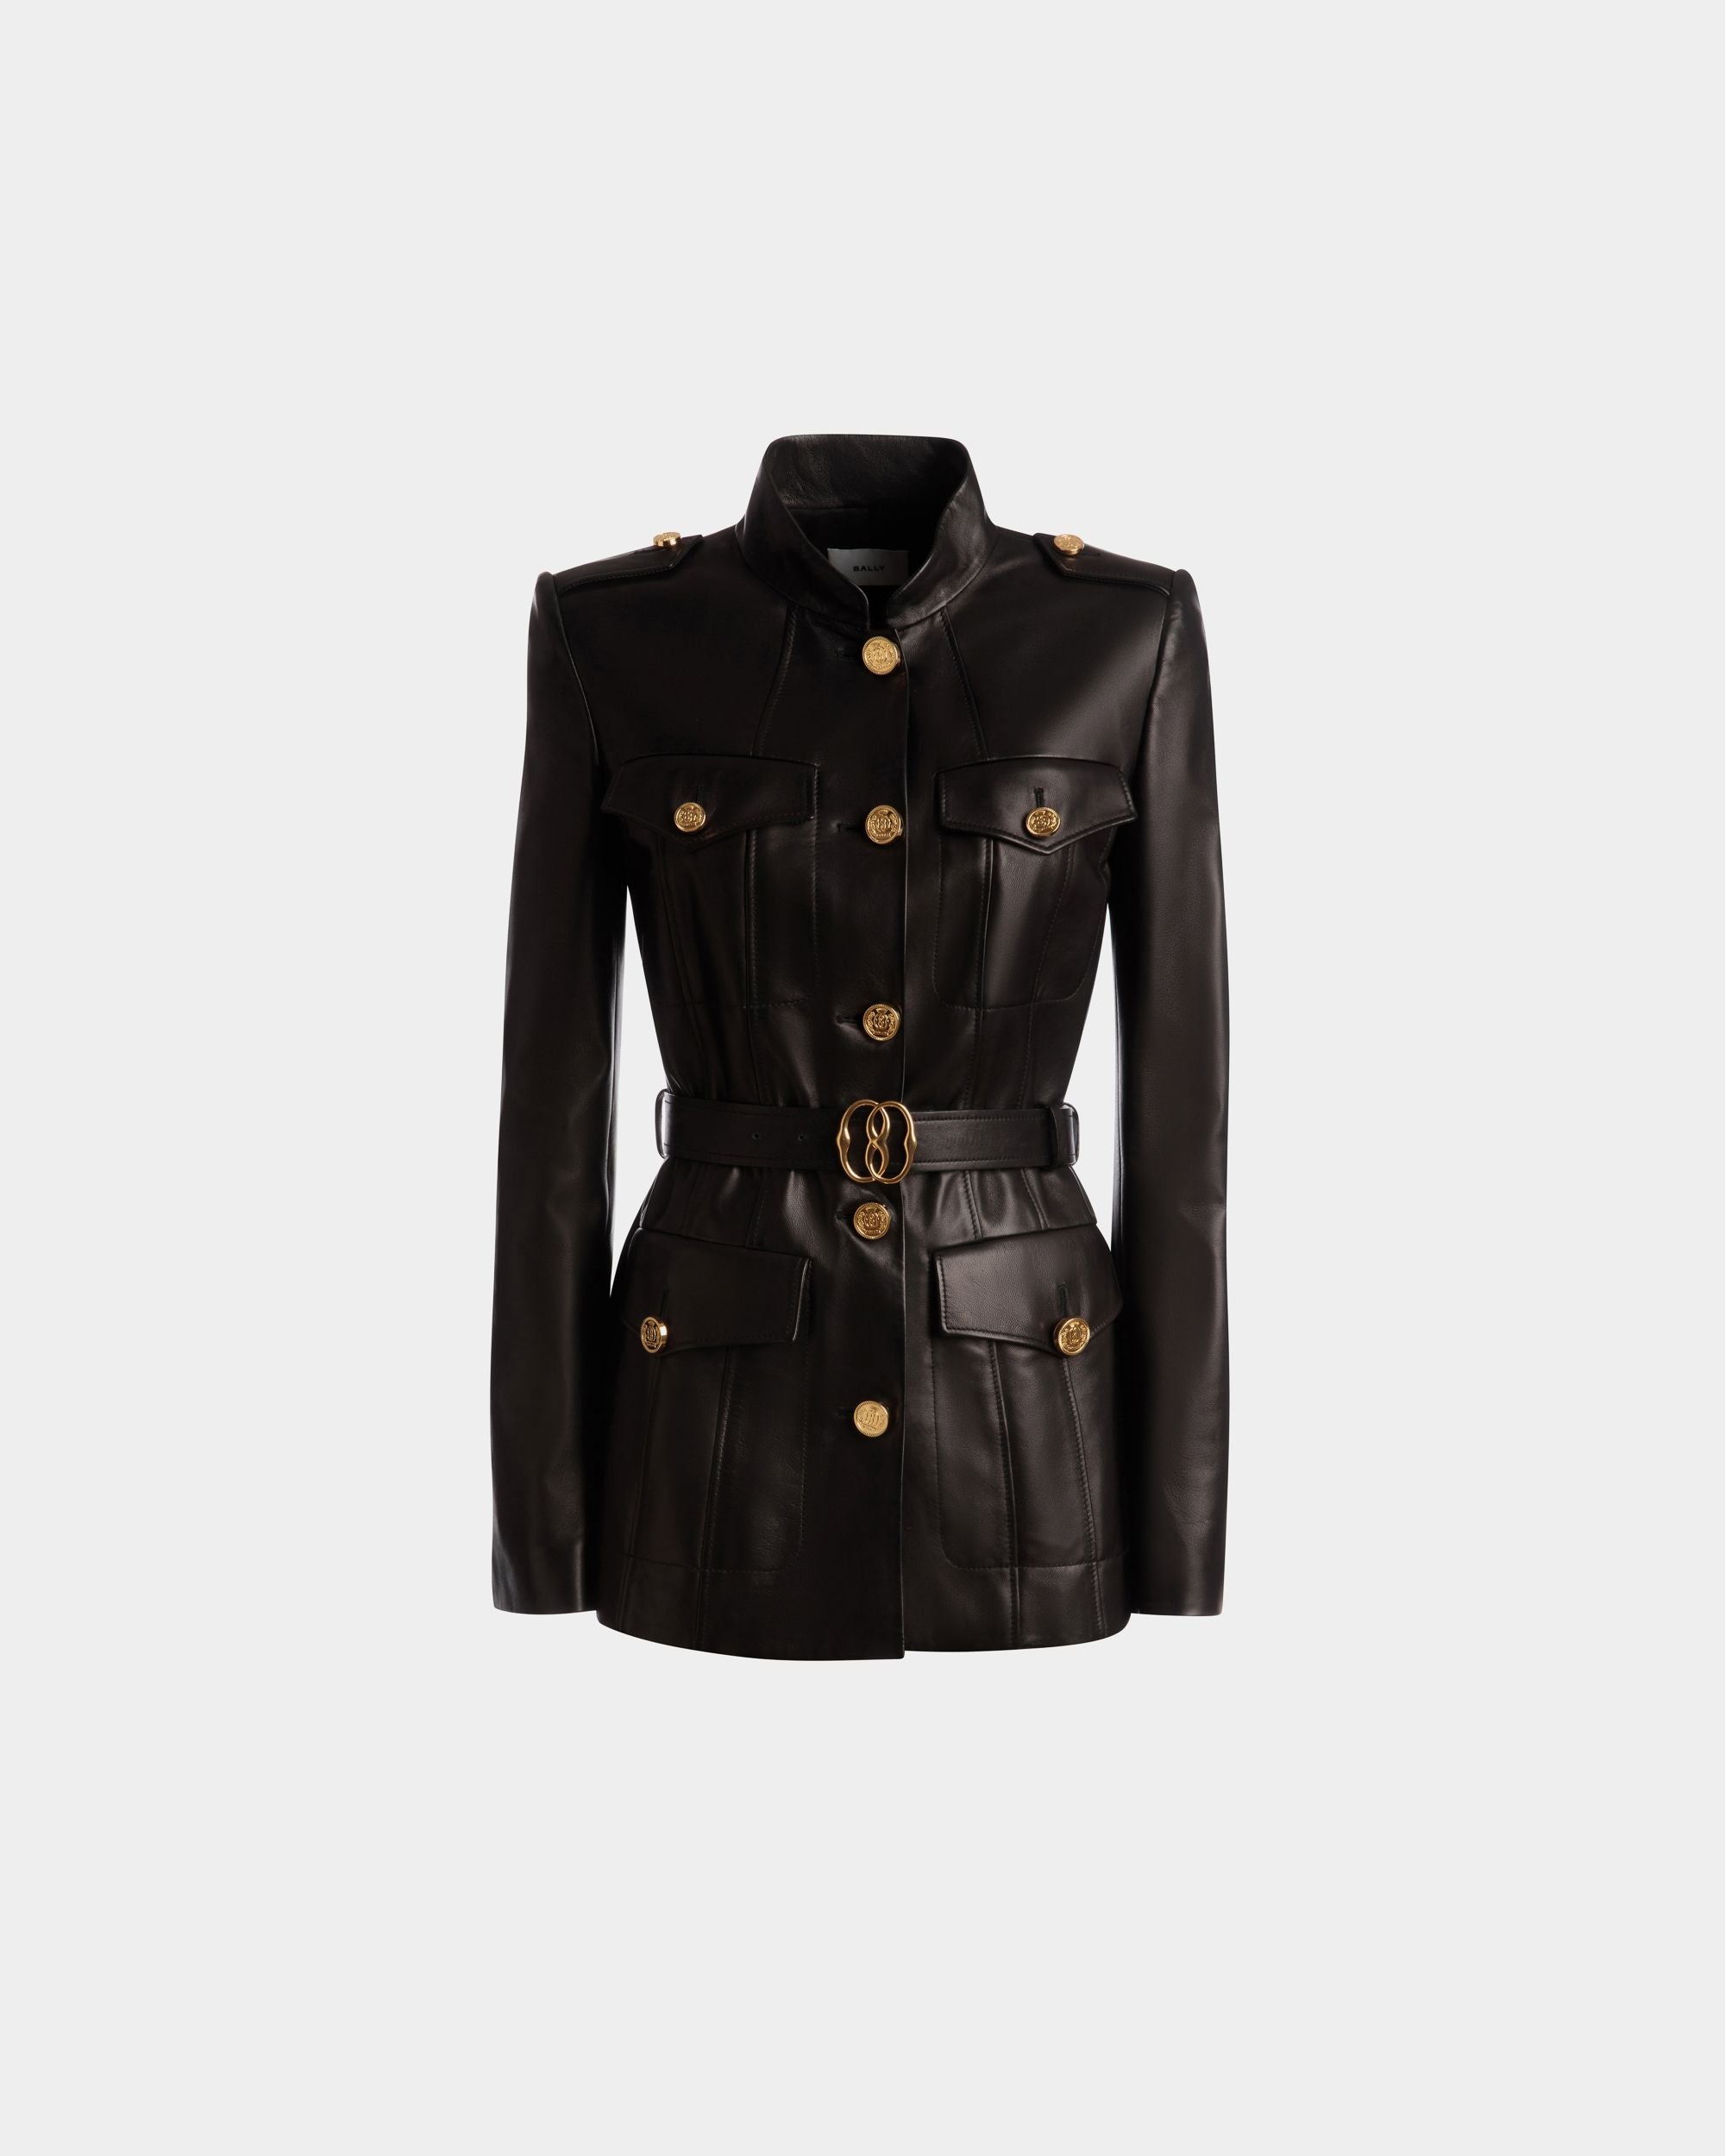 Belted Jacket | Women's Outerwear | Black Leather | Bally | Still Life Front